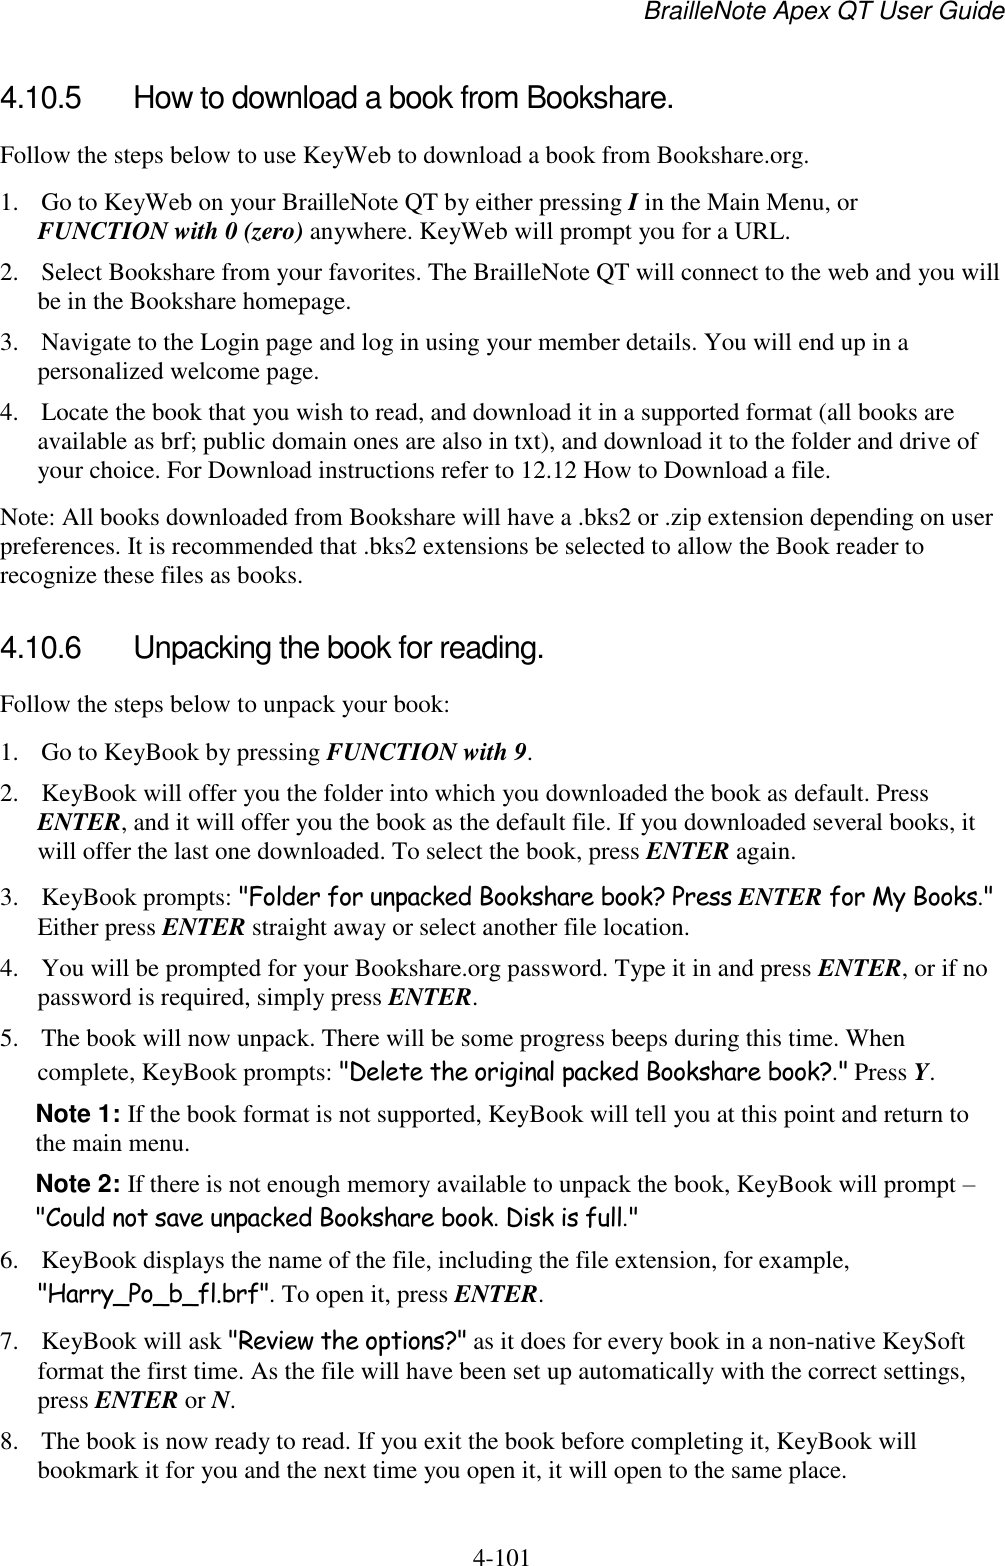 BrailleNote Apex QT User Guide  4-101   4.10.5  How to download a book from Bookshare. Follow the steps below to use KeyWeb to download a book from Bookshare.org. 1. Go to KeyWeb on your BrailleNote QT by either pressing I in the Main Menu, or FUNCTION with 0 (zero) anywhere. KeyWeb will prompt you for a URL. 2. Select Bookshare from your favorites. The BrailleNote QT will connect to the web and you will be in the Bookshare homepage. 3. Navigate to the Login page and log in using your member details. You will end up in a personalized welcome page. 4. Locate the book that you wish to read, and download it in a supported format (all books are available as brf; public domain ones are also in txt), and download it to the folder and drive of your choice. For Download instructions refer to 12.12 How to Download a file. Note: All books downloaded from Bookshare will have a .bks2 or .zip extension depending on user preferences. It is recommended that .bks2 extensions be selected to allow the Book reader to recognize these files as books.   4.10.6  Unpacking the book for reading. Follow the steps below to unpack your book: 1. Go to KeyBook by pressing FUNCTION with 9. 2. KeyBook will offer you the folder into which you downloaded the book as default. Press ENTER, and it will offer you the book as the default file. If you downloaded several books, it will offer the last one downloaded. To select the book, press ENTER again. 3. KeyBook prompts: &quot;Folder for unpacked Bookshare book? Press ENTER for My Books.&quot; Either press ENTER straight away or select another file location. 4. You will be prompted for your Bookshare.org password. Type it in and press ENTER, or if no password is required, simply press ENTER. 5. The book will now unpack. There will be some progress beeps during this time. When complete, KeyBook prompts: &quot;Delete the original packed Bookshare book?.&quot; Press Y. Note 1: If the book format is not supported, KeyBook will tell you at this point and return to the main menu. Note 2: If there is not enough memory available to unpack the book, KeyBook will prompt – &quot;Could not save unpacked Bookshare book. Disk is full.&quot; 6. KeyBook displays the name of the file, including the file extension, for example, &quot;Harry_Po_b_fl.brf&quot;. To open it, press ENTER. 7. KeyBook will ask &quot;Review the options?&quot; as it does for every book in a non-native KeySoft format the first time. As the file will have been set up automatically with the correct settings, press ENTER or N. 8. The book is now ready to read. If you exit the book before completing it, KeyBook will bookmark it for you and the next time you open it, it will open to the same place. 